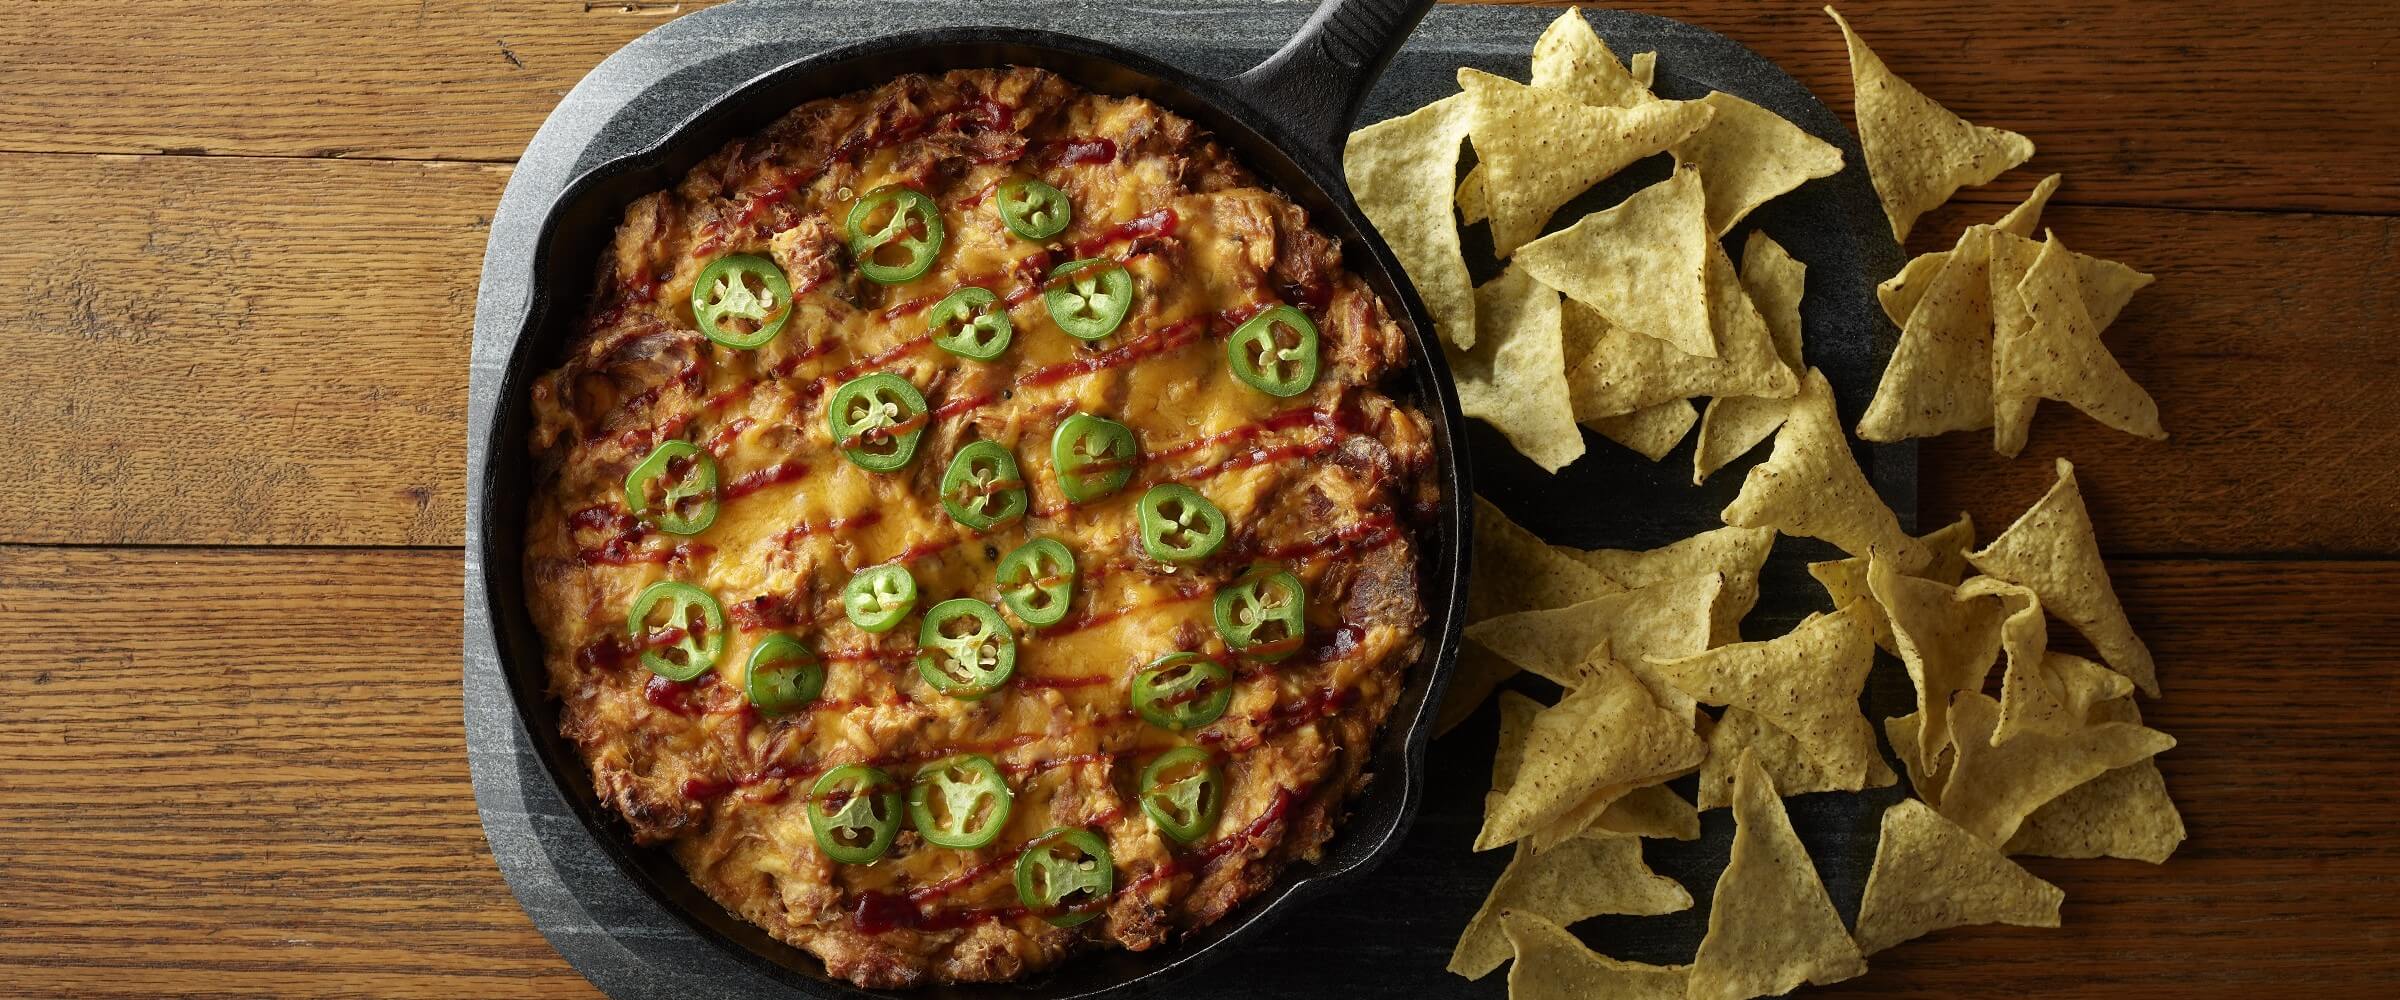 BBQ pulled pork dip topped with cheese and jalapenos in skilled with chips on the side